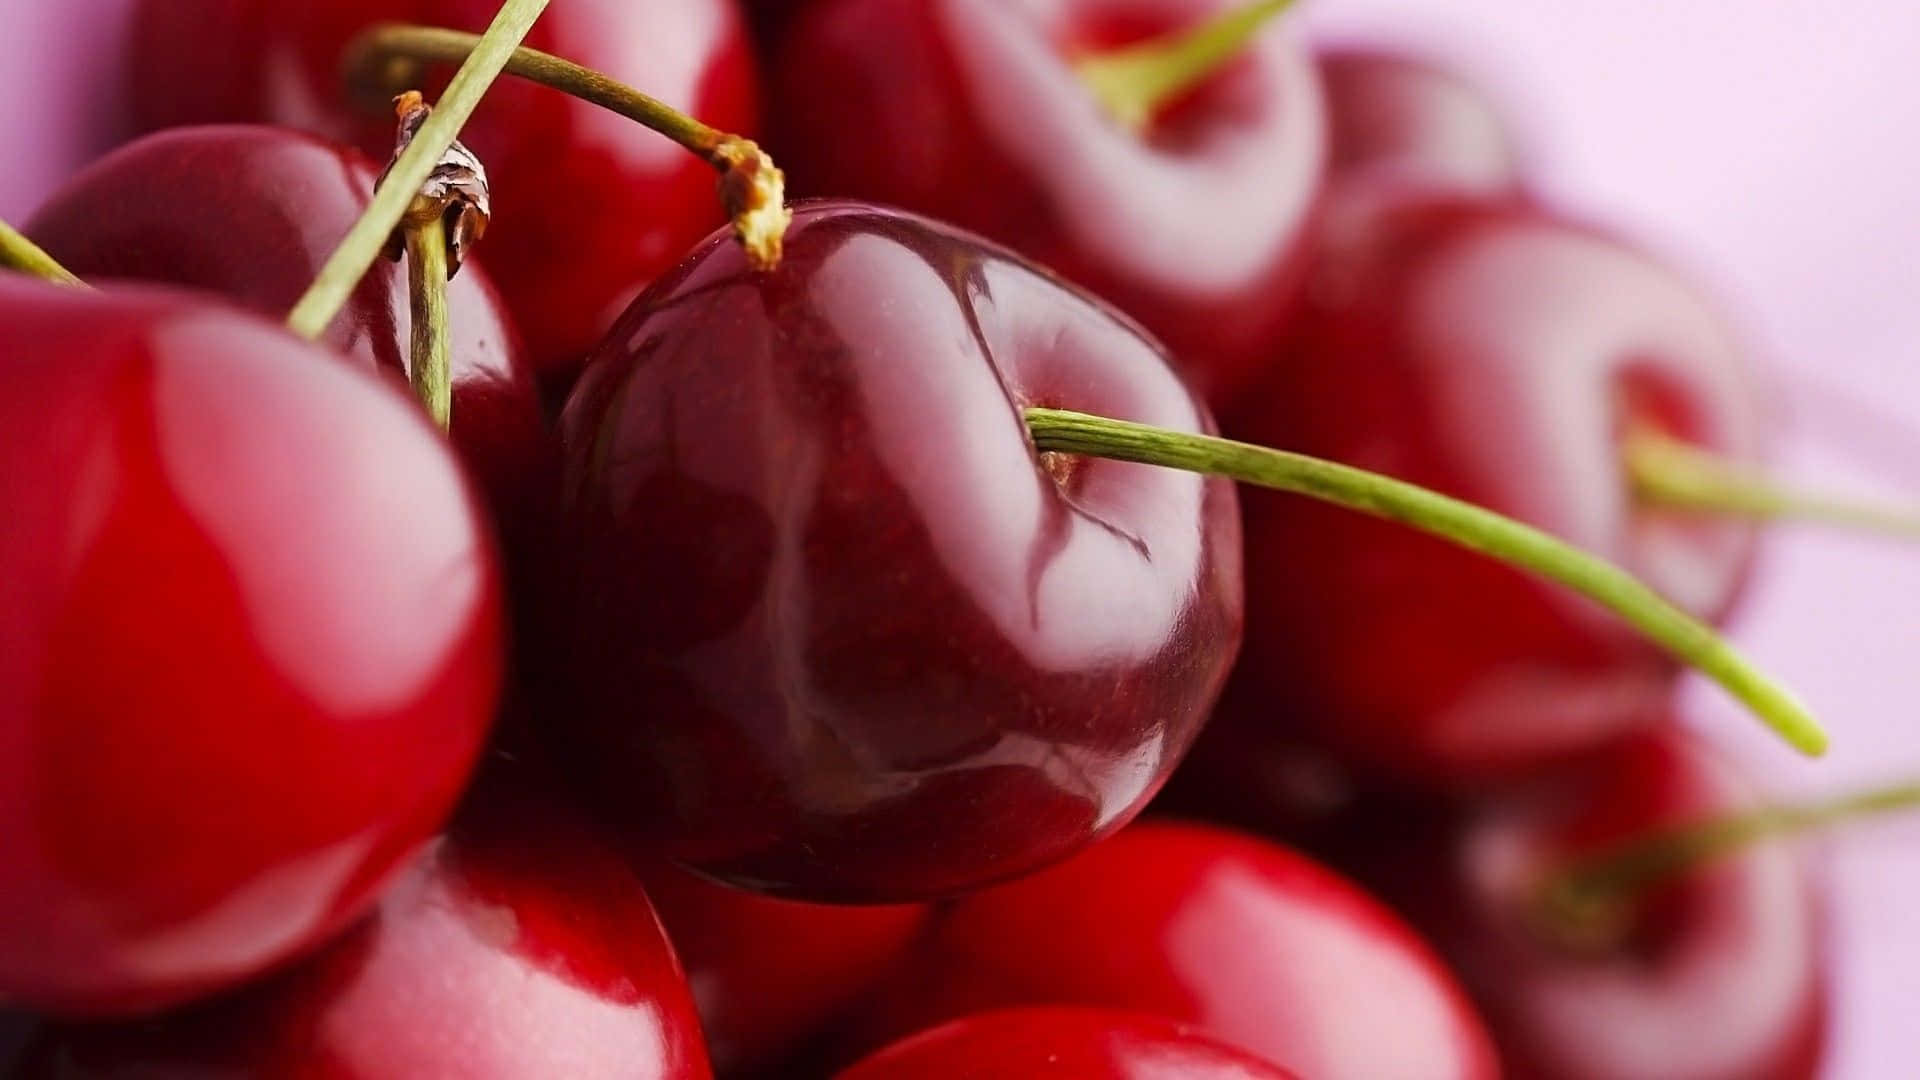 A Bunch Of Cherries Are Arranged On A Purple Surface